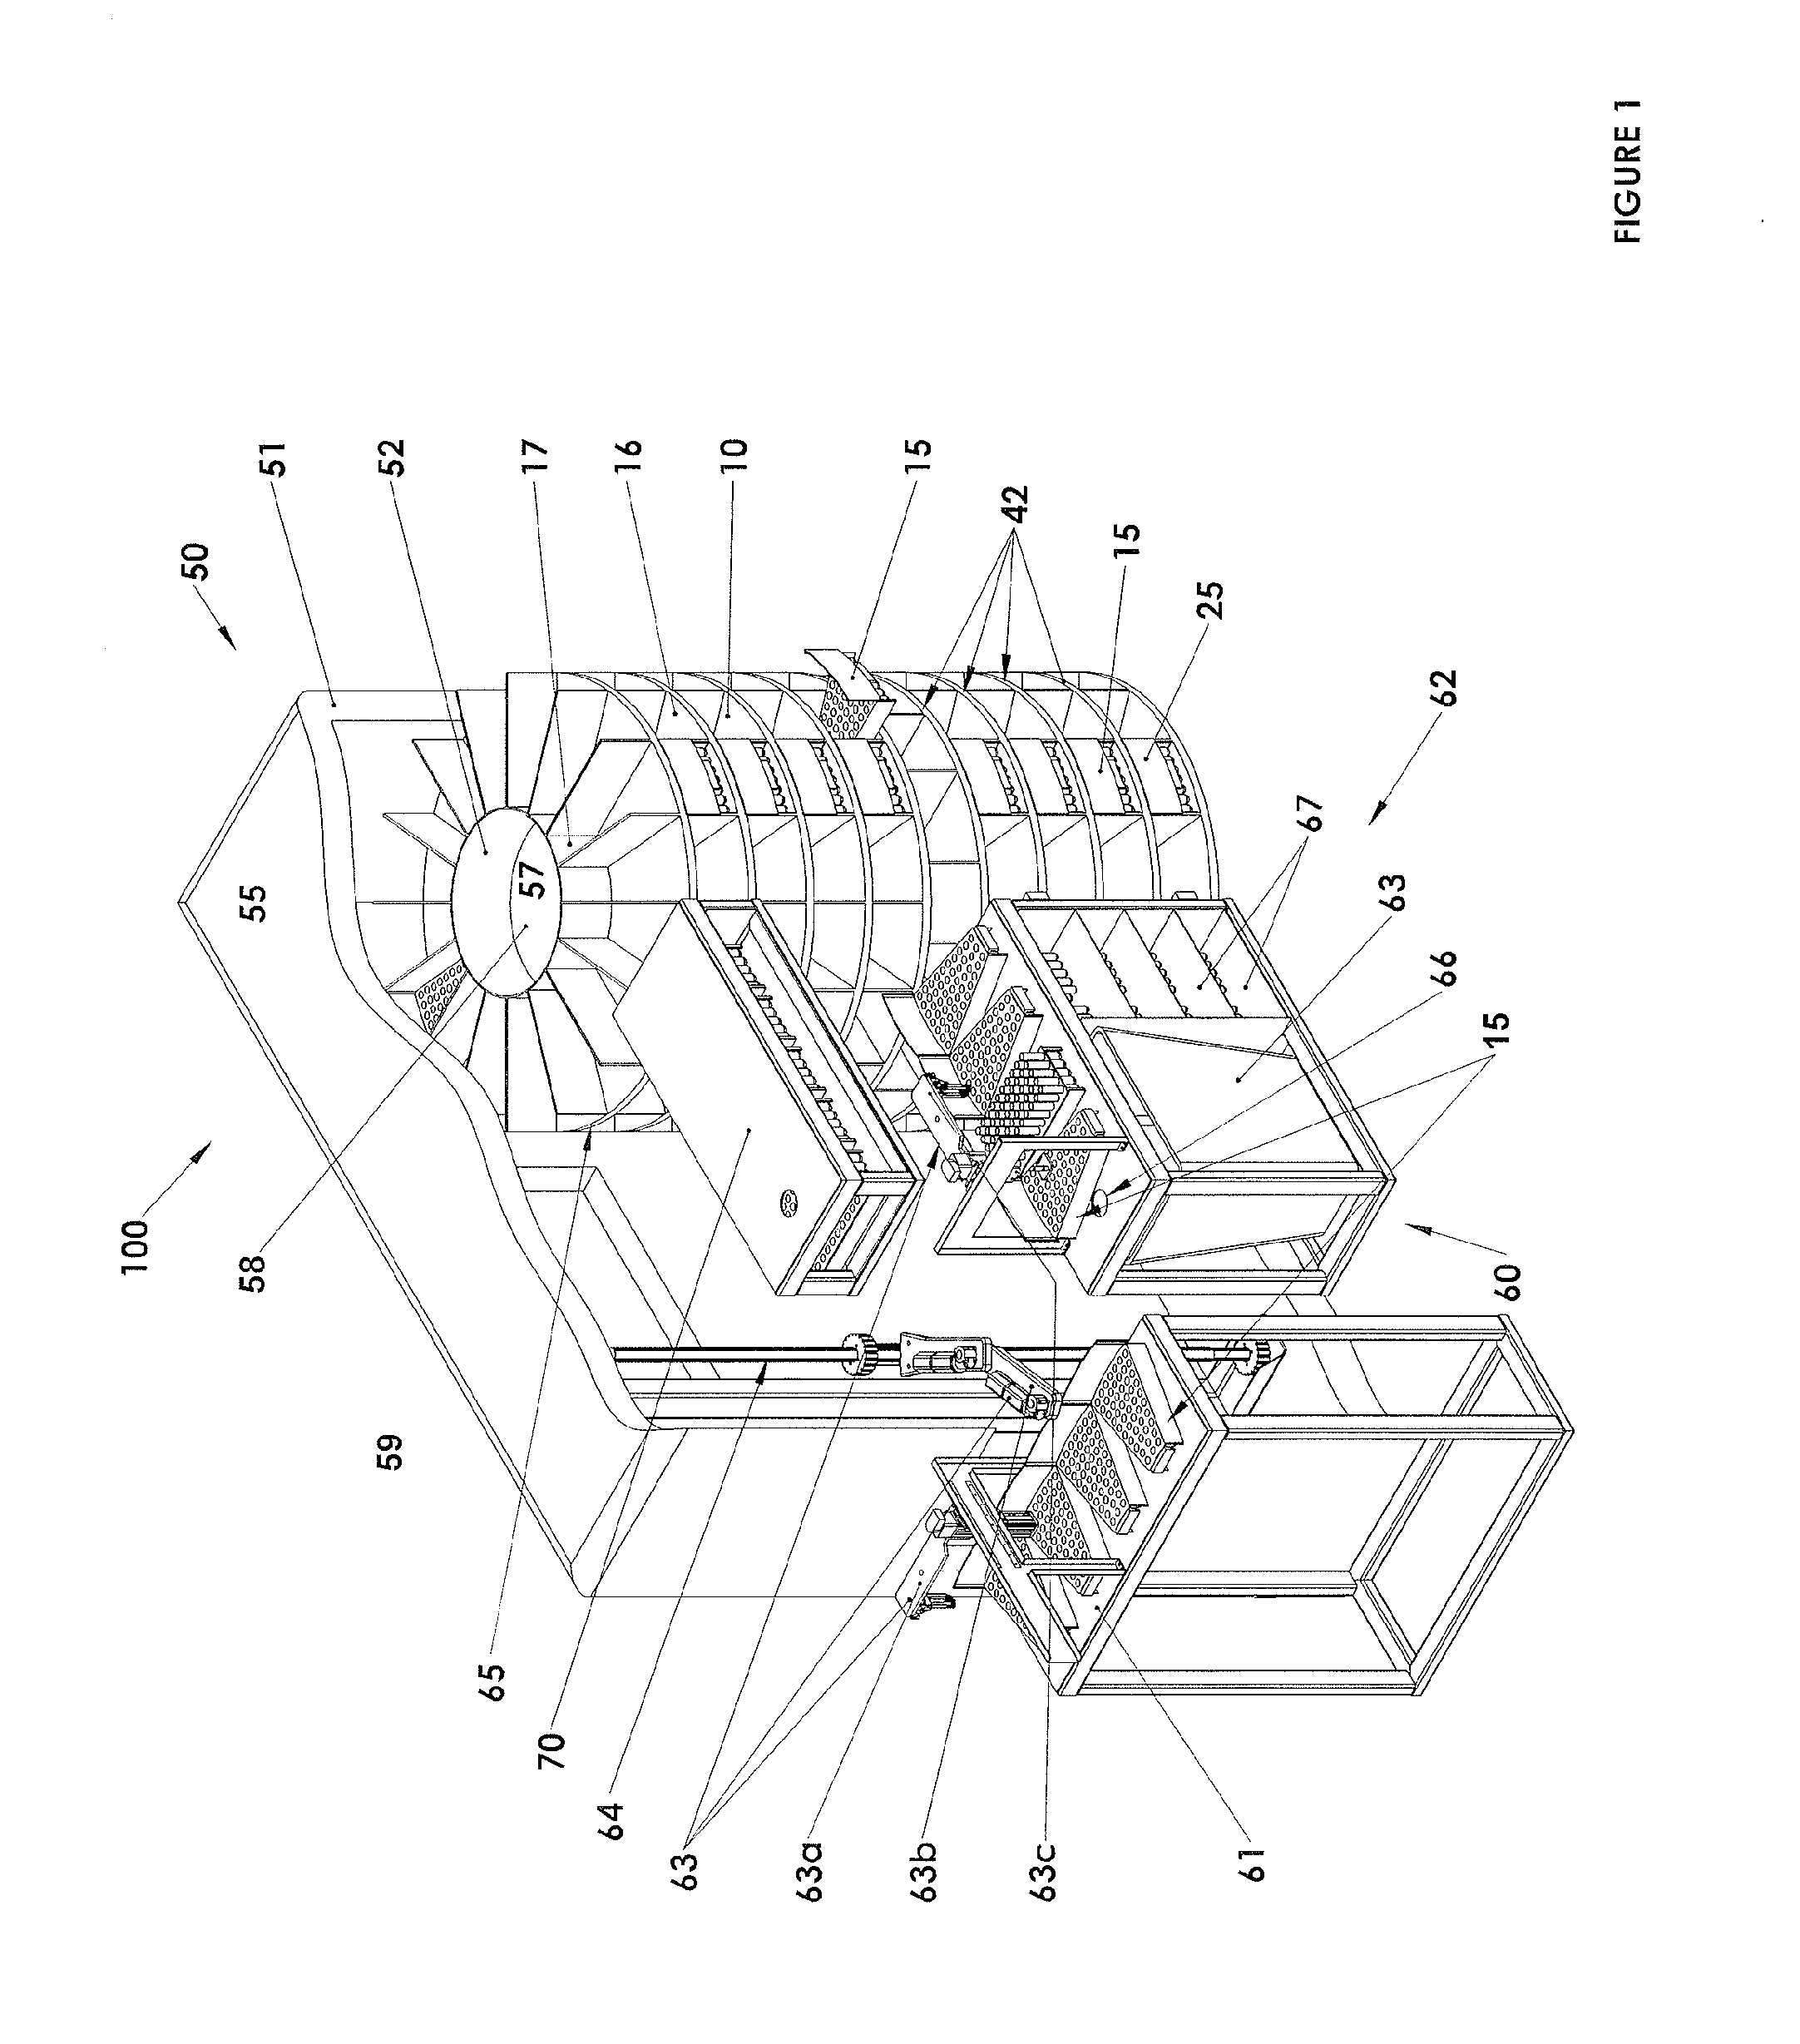 Automated, refrigerated specimen inventory management system